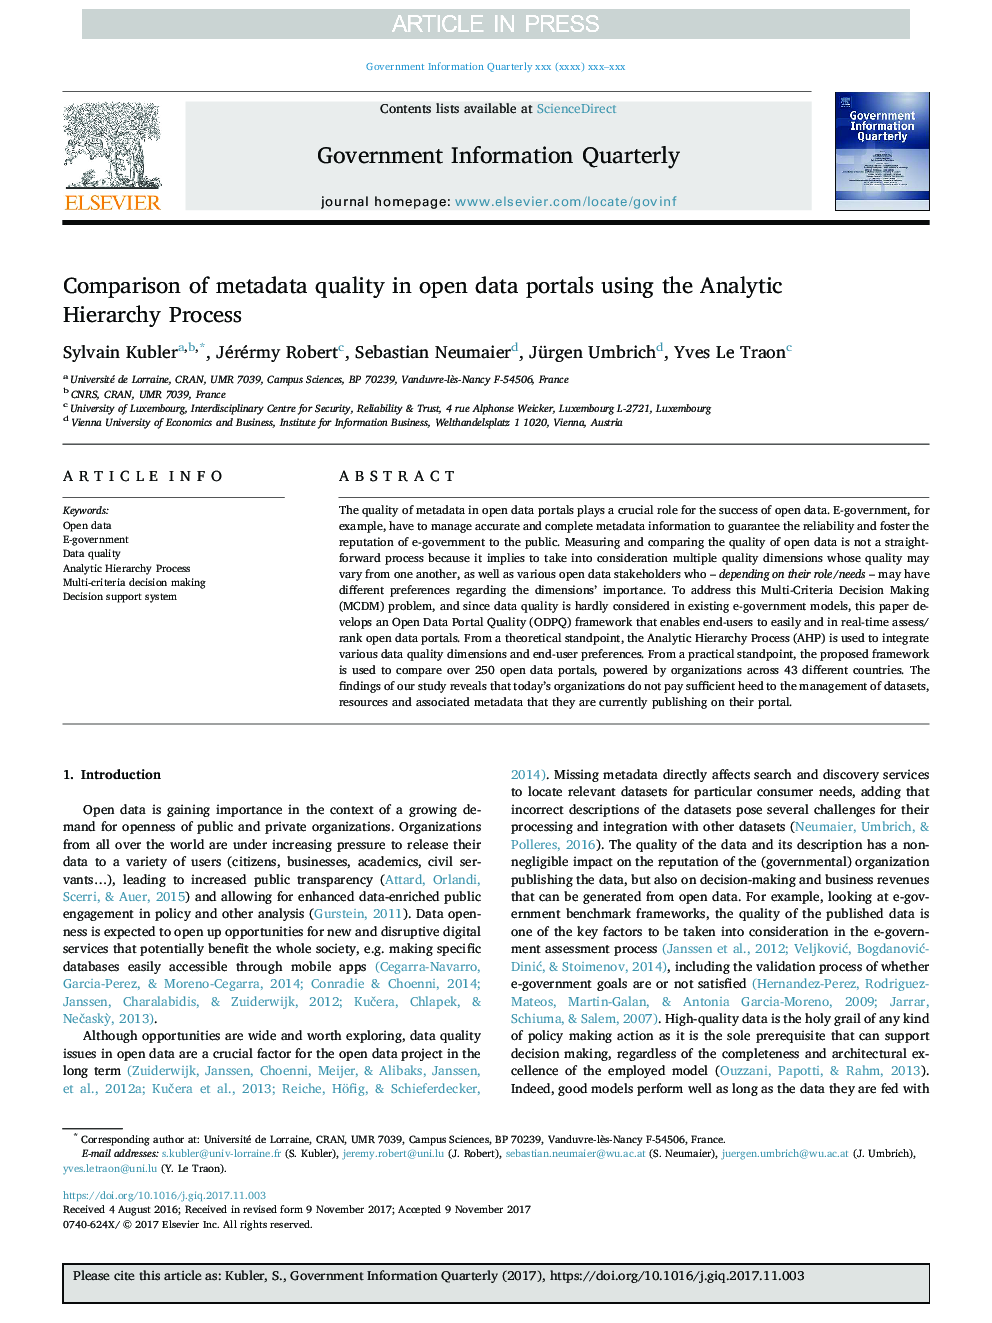 Comparison of metadata quality in open data portals using the Analytic Hierarchy Process